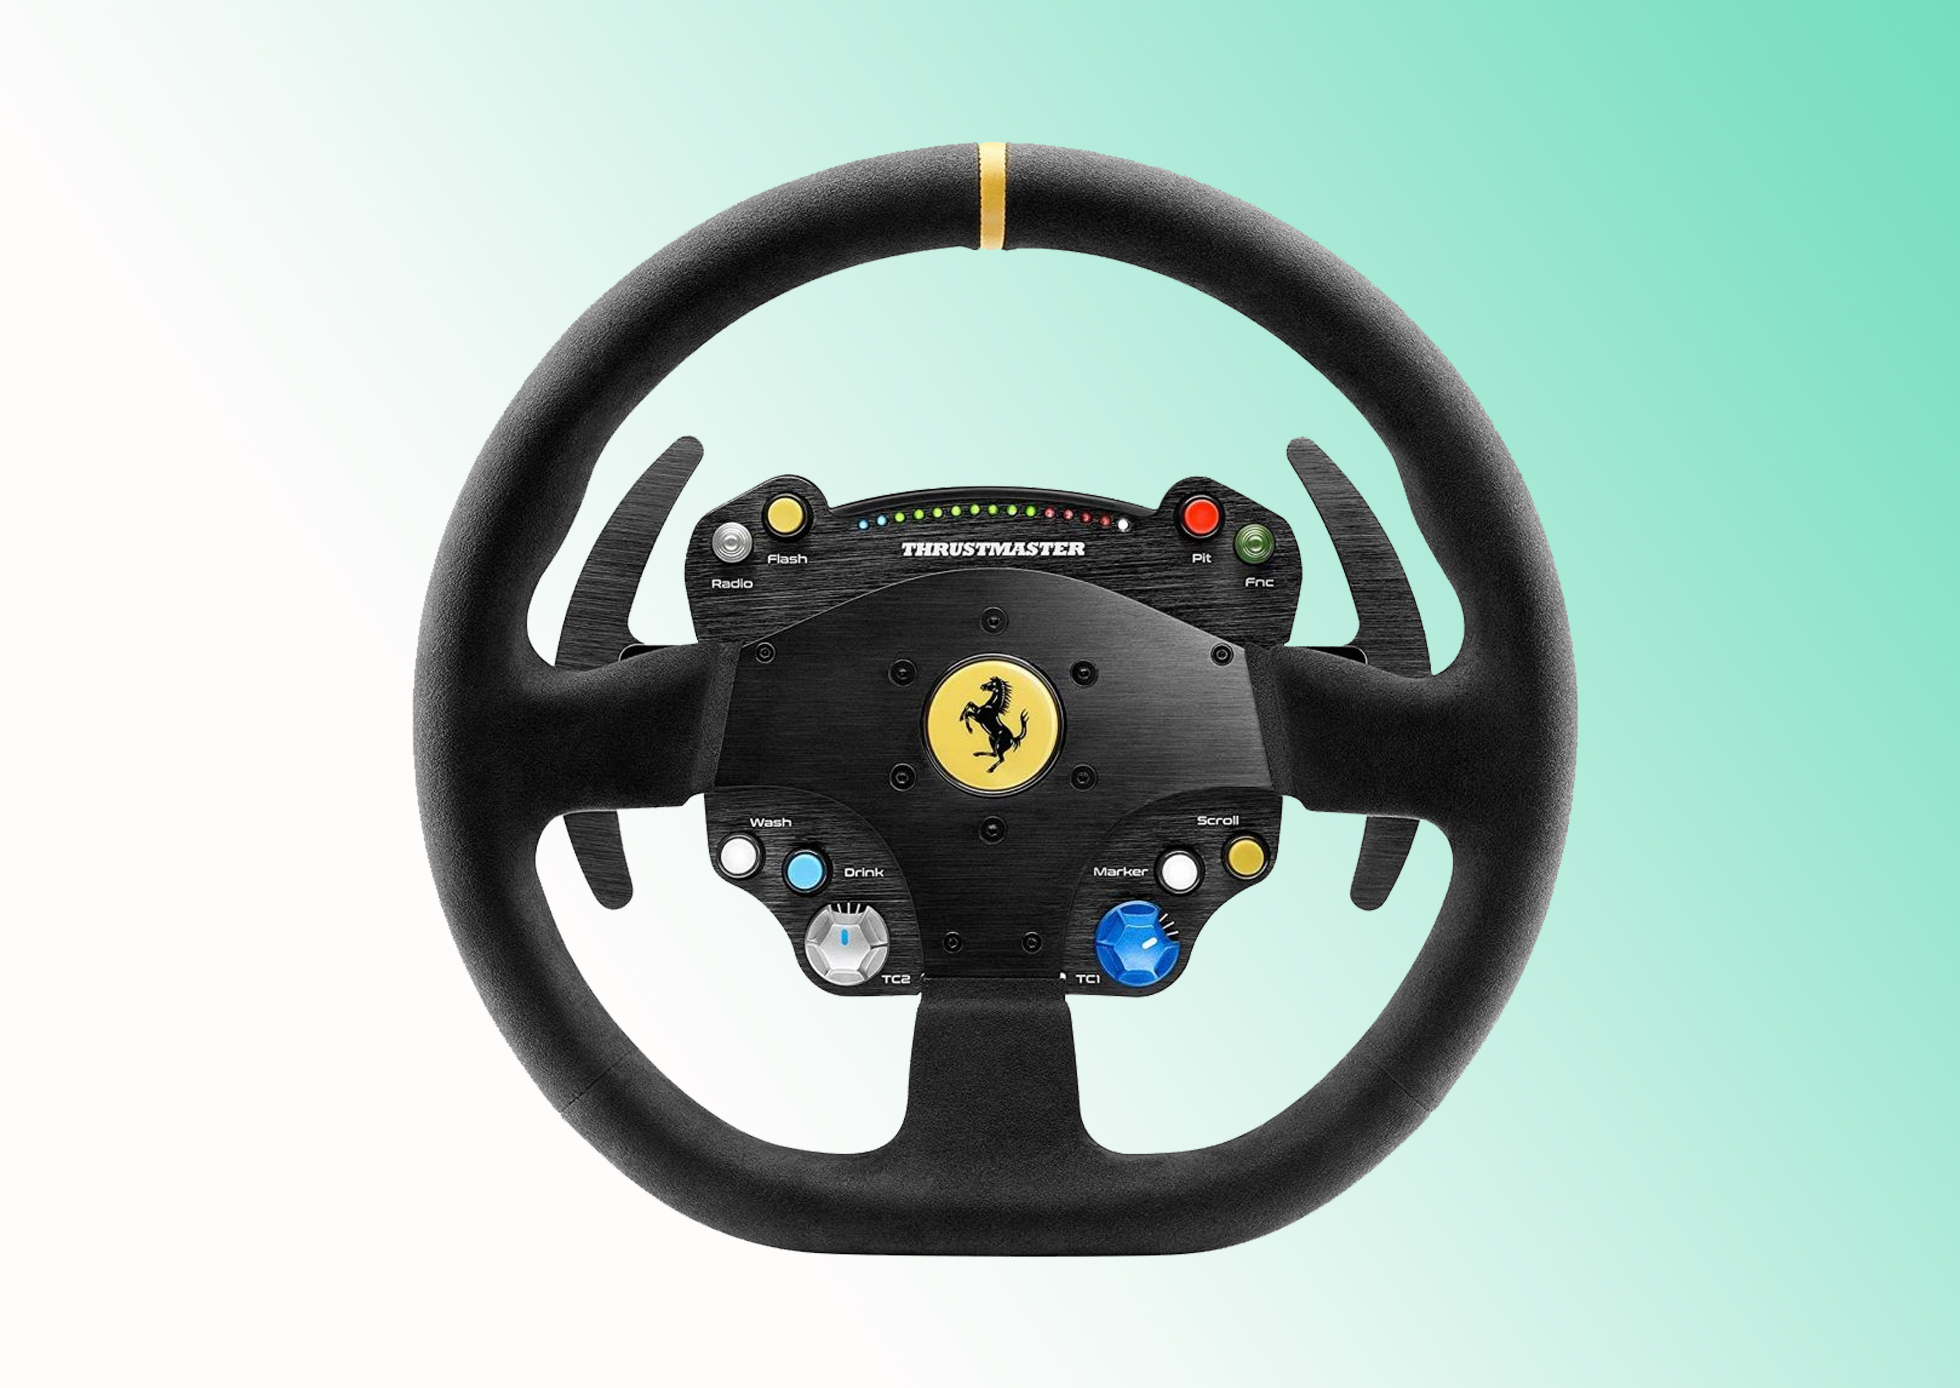 Test and Reviews of the Thrustmaster TS PC Racer Ferrari 488 steering wheel